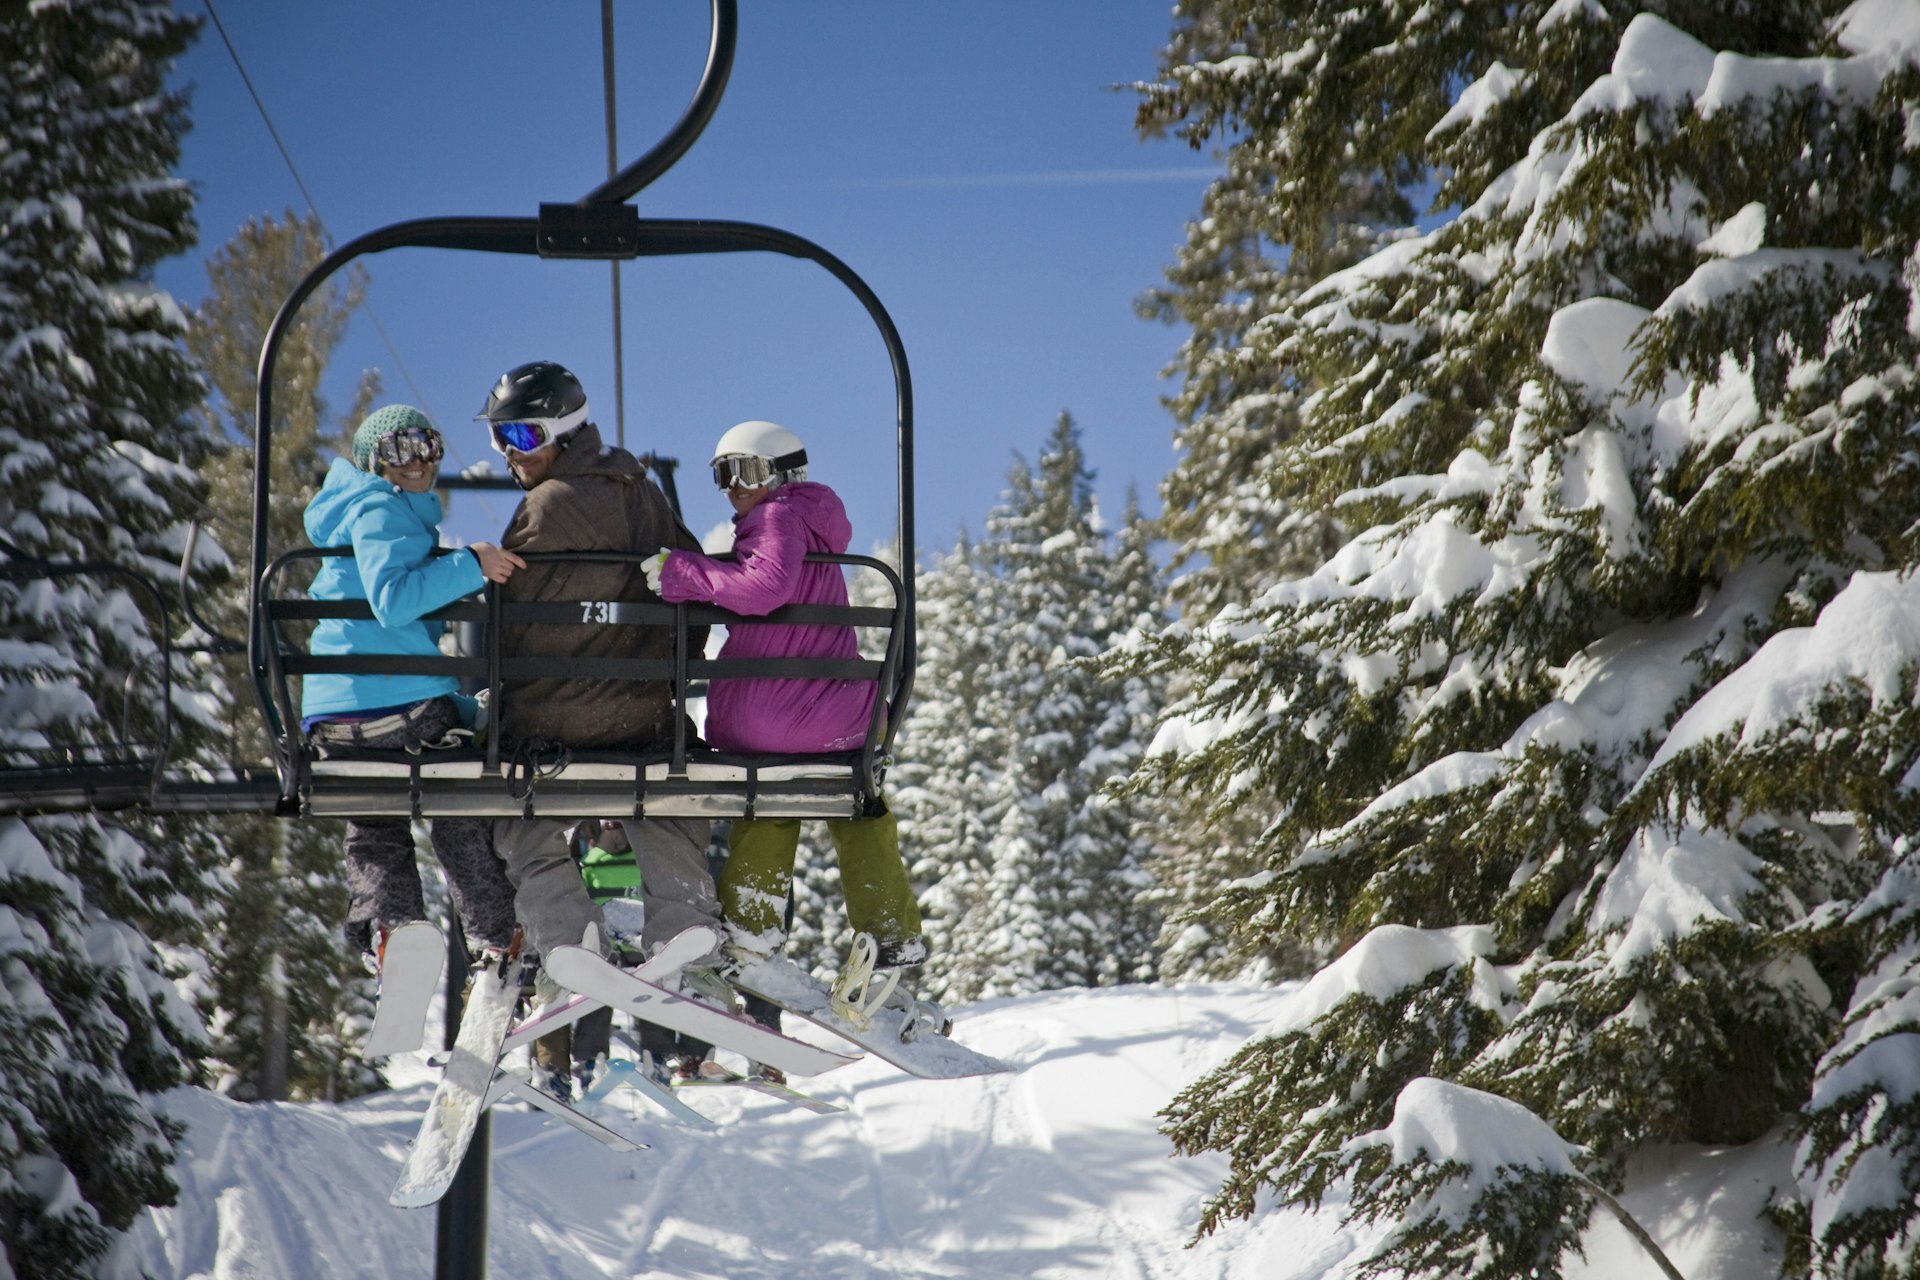 Three smiling skiers on a chair lift during a sunny day in Palisades Tahoe (Squaw Valley), California, USA